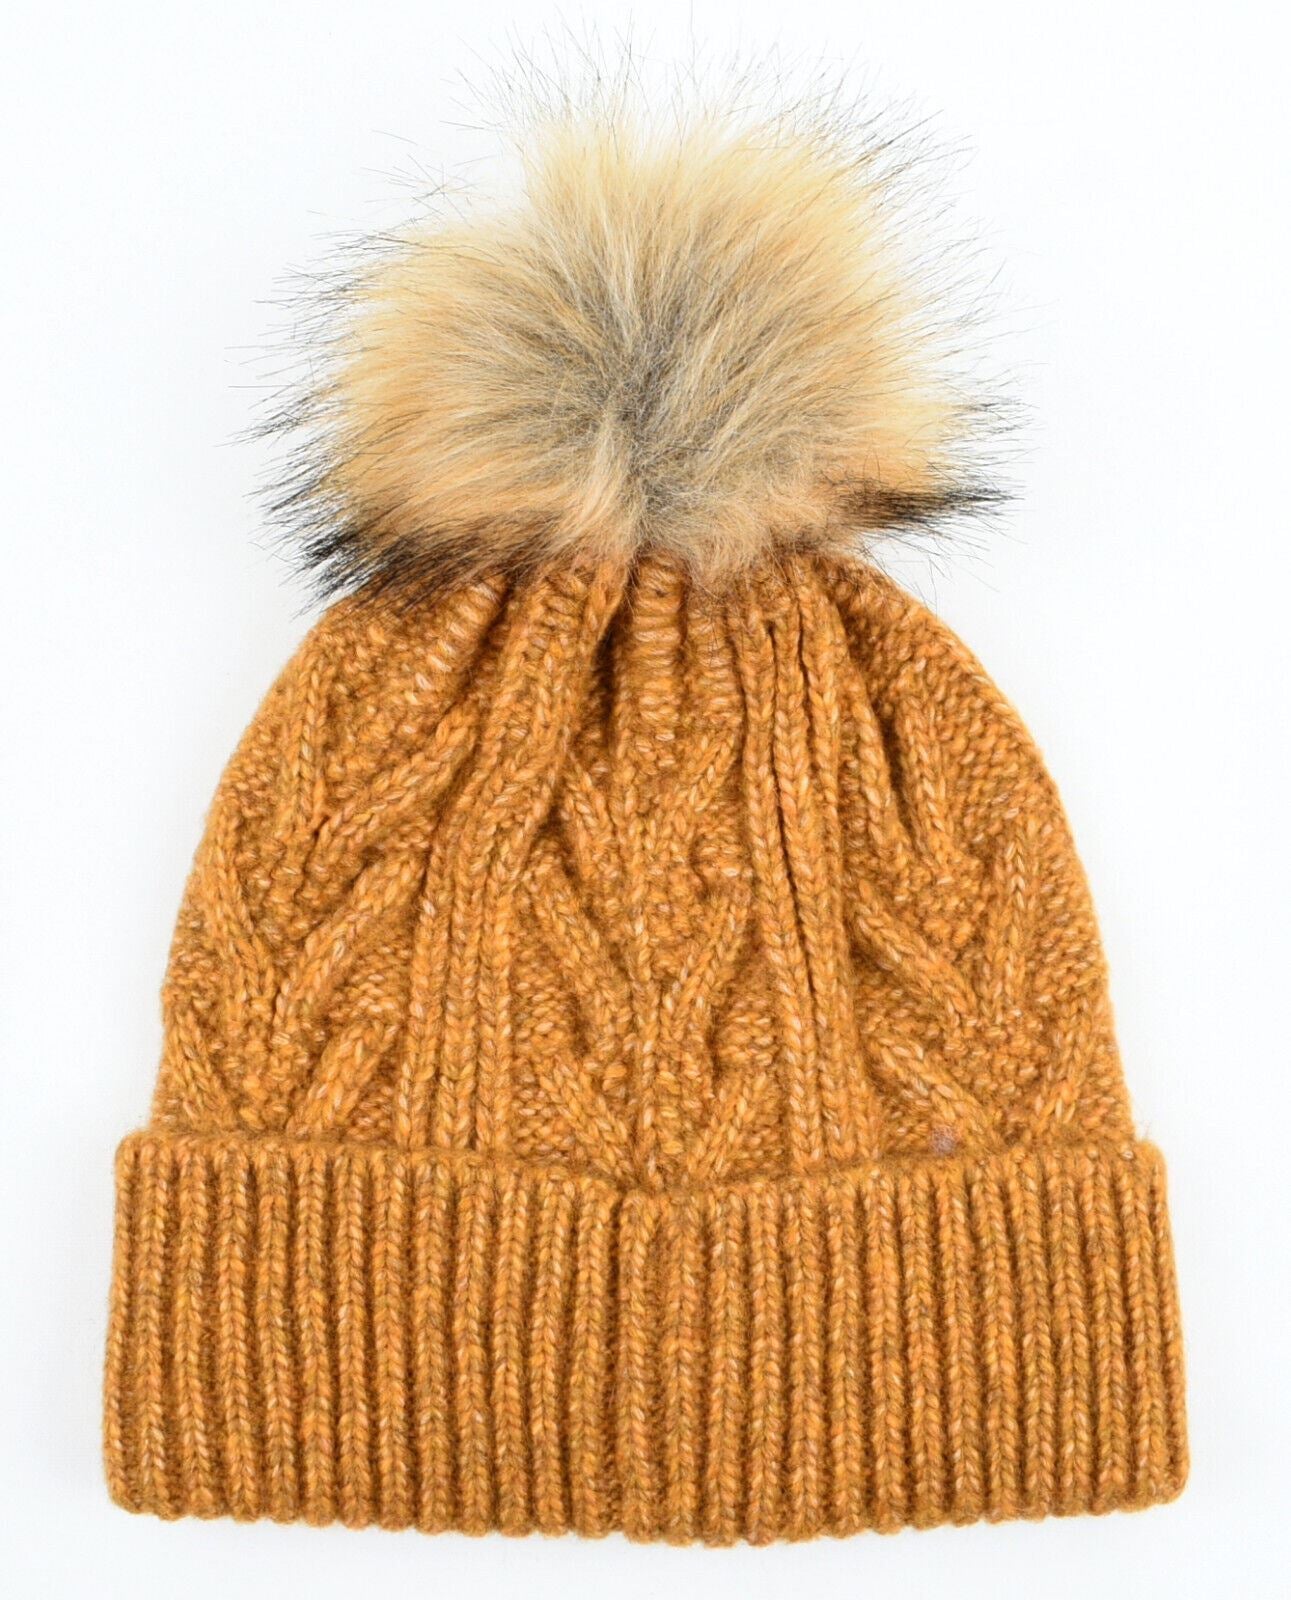 SUPERDRY Women's LUX Cable Beanie Bobble Hat, Tumeric Tan Brown, One Size